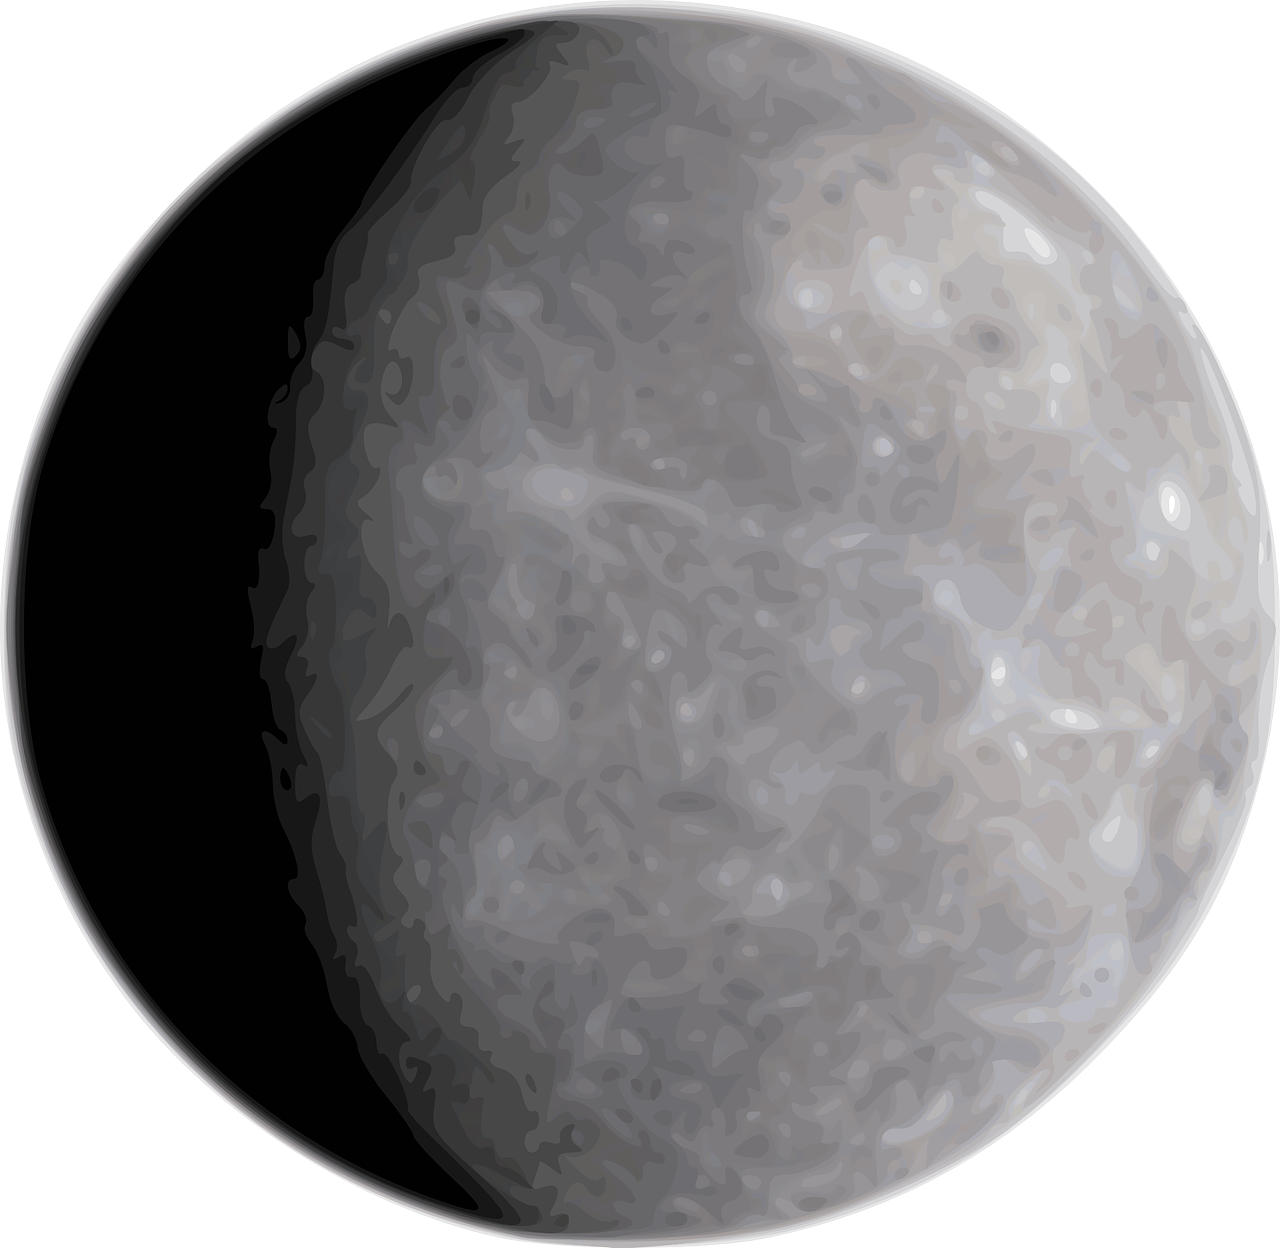 drawing of the planet mercury